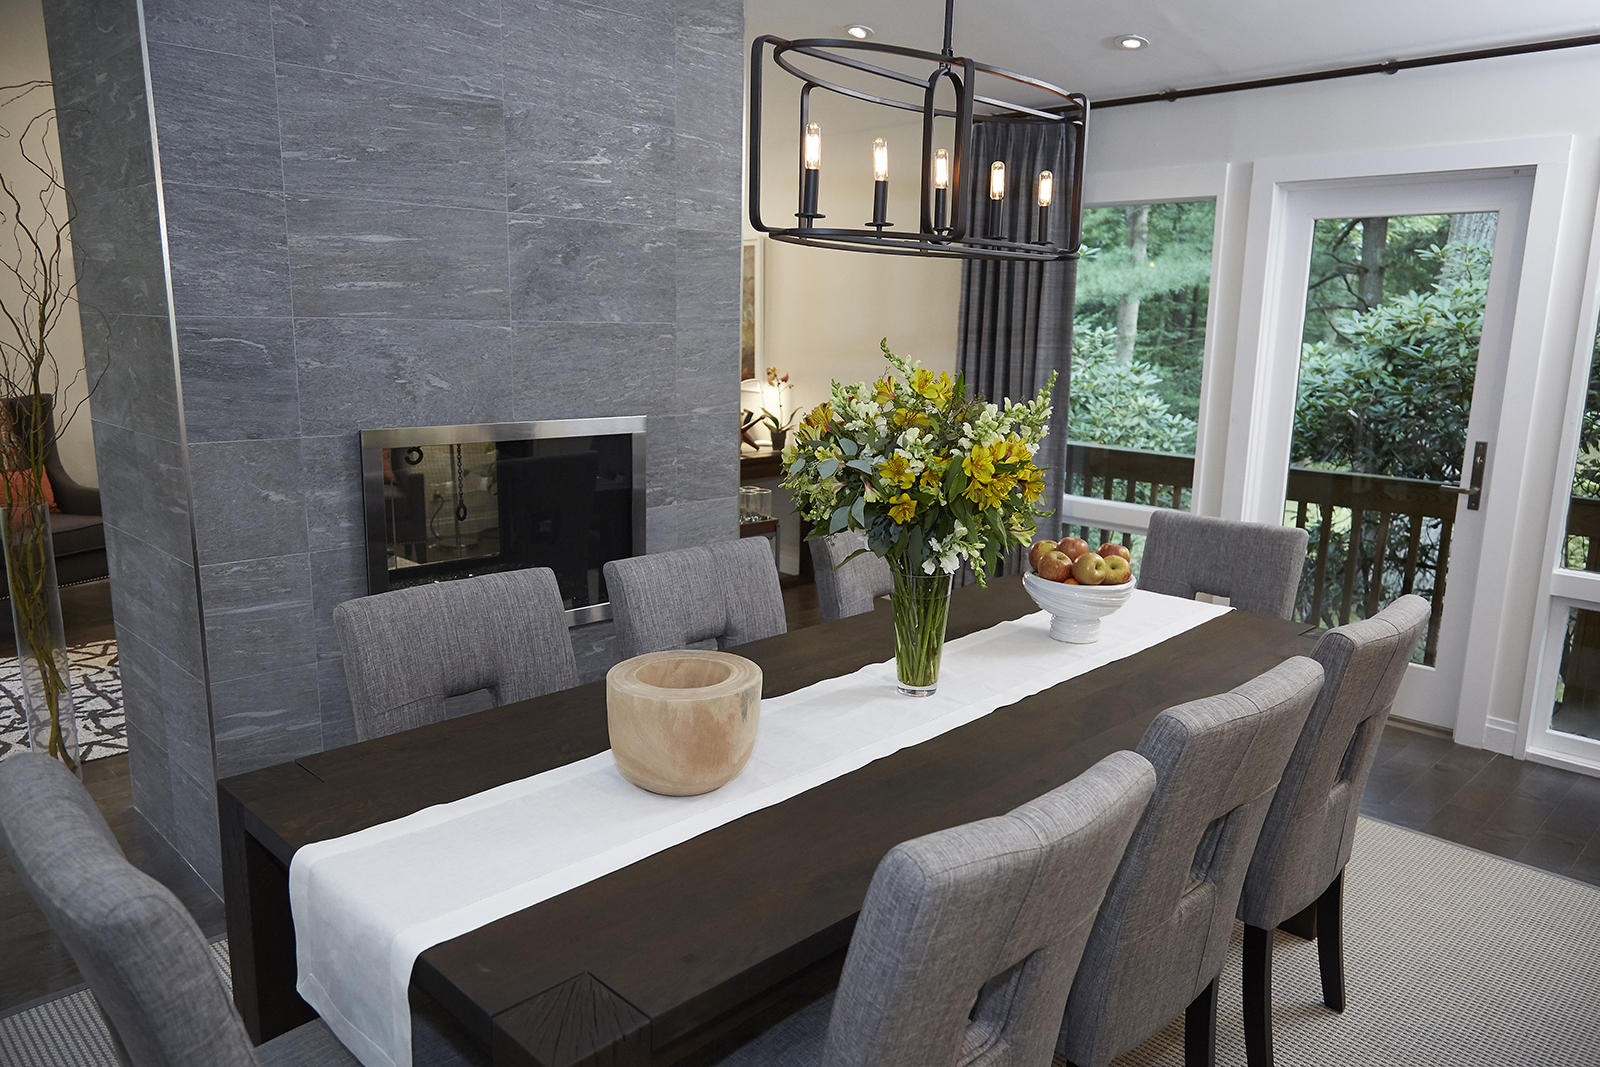 Property Brothers create a bright and modern family home.